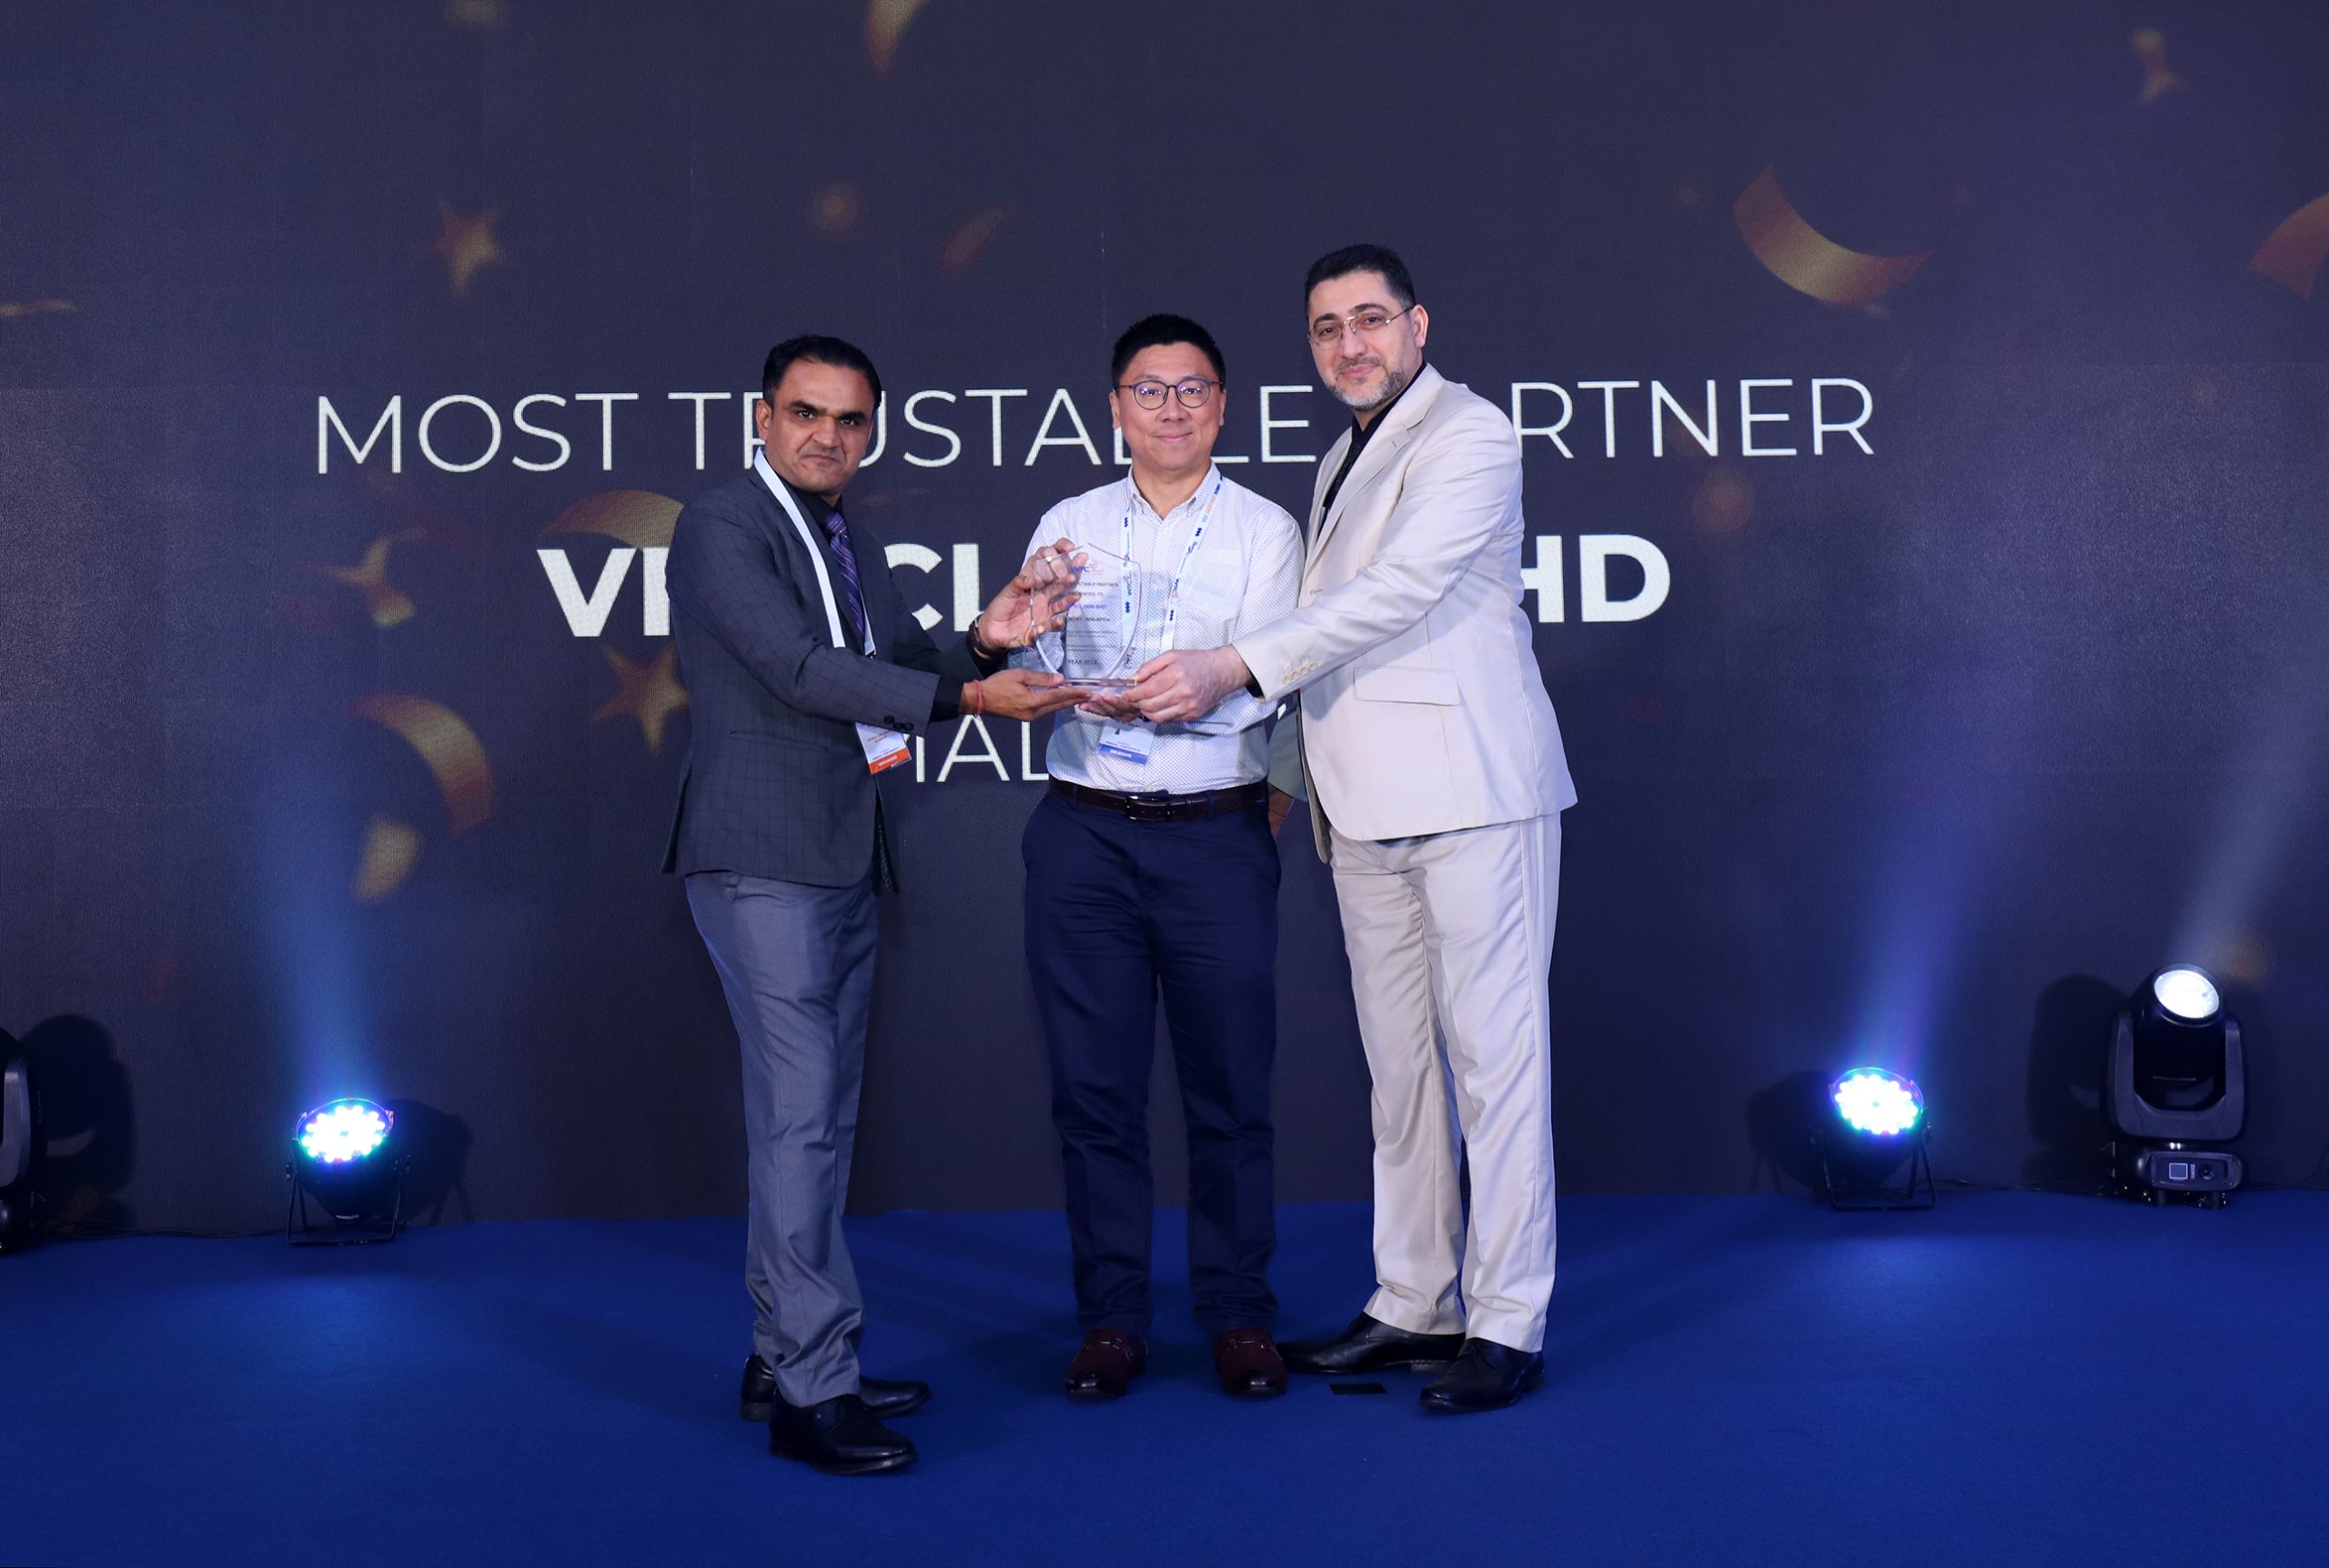 VH SCL Sdn Bhd had been awarded The Most Trustable Partner by WTC Alliance Conference held in Bangkok June 2024